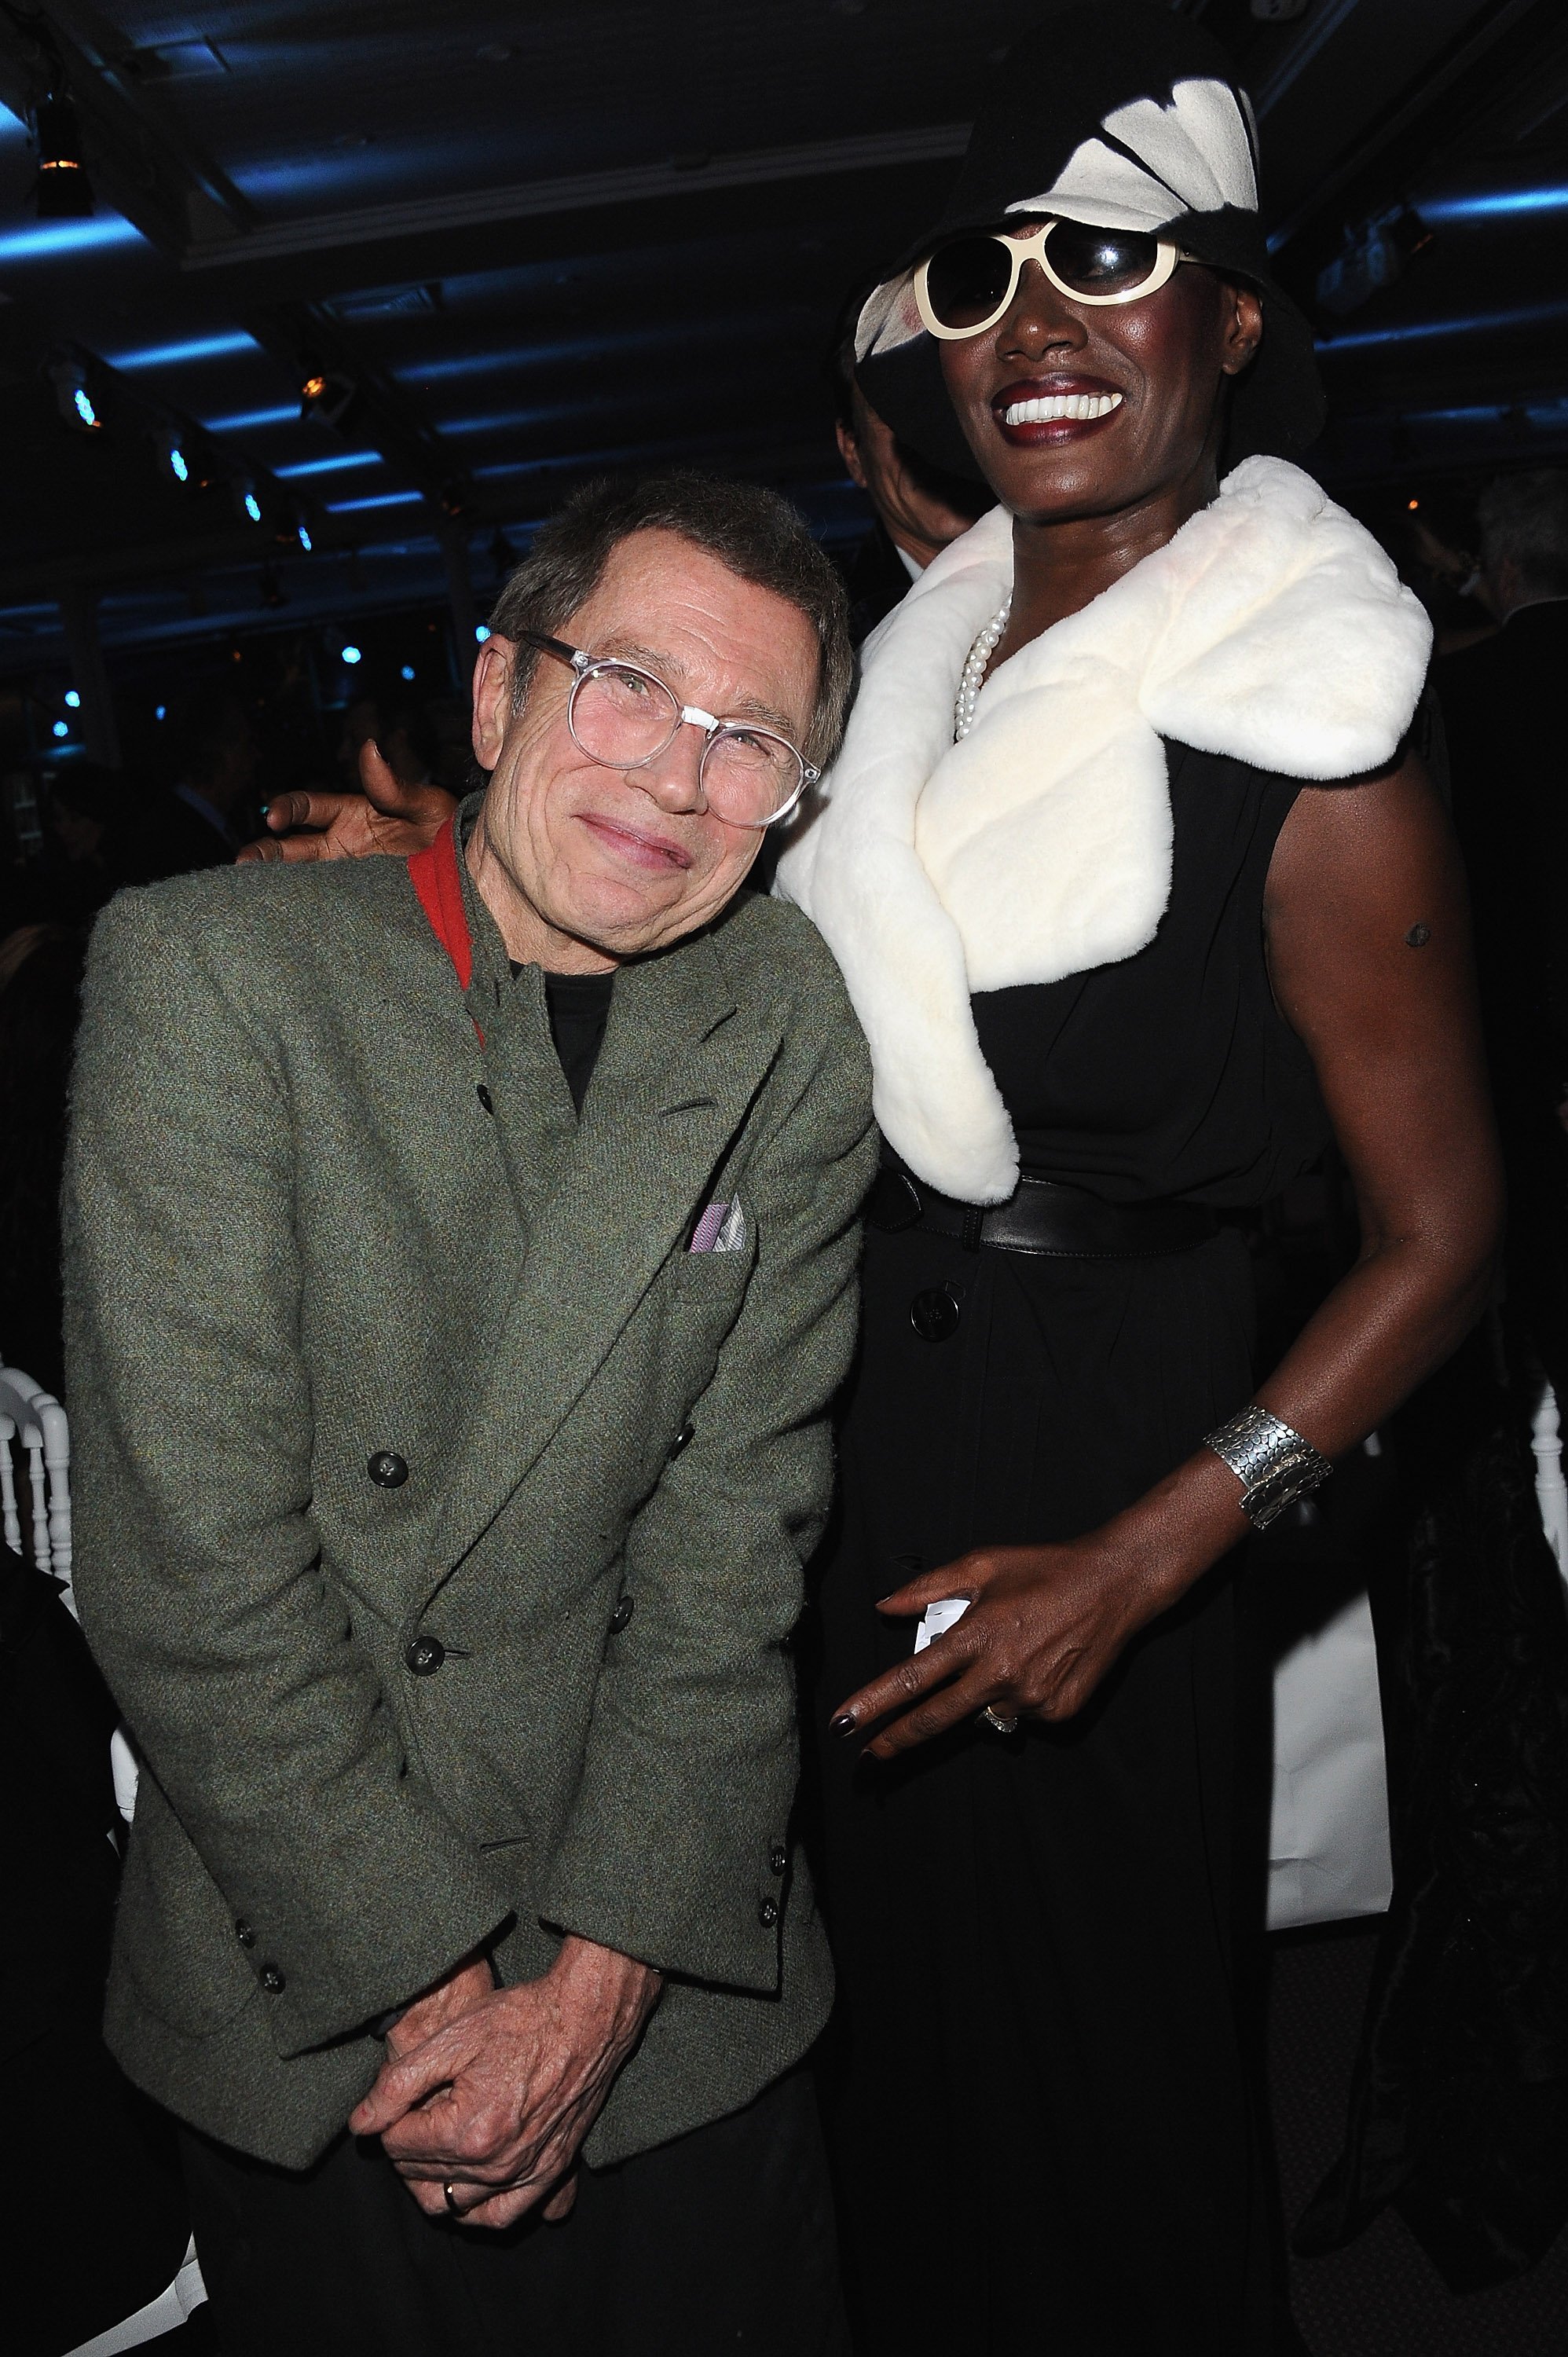 Grace Jones & her son's father, Jean-Paul Goude at the Sidaction Gala Dinner in Paris, France on Jan. 26, 2012. |Photo: Getty Images.